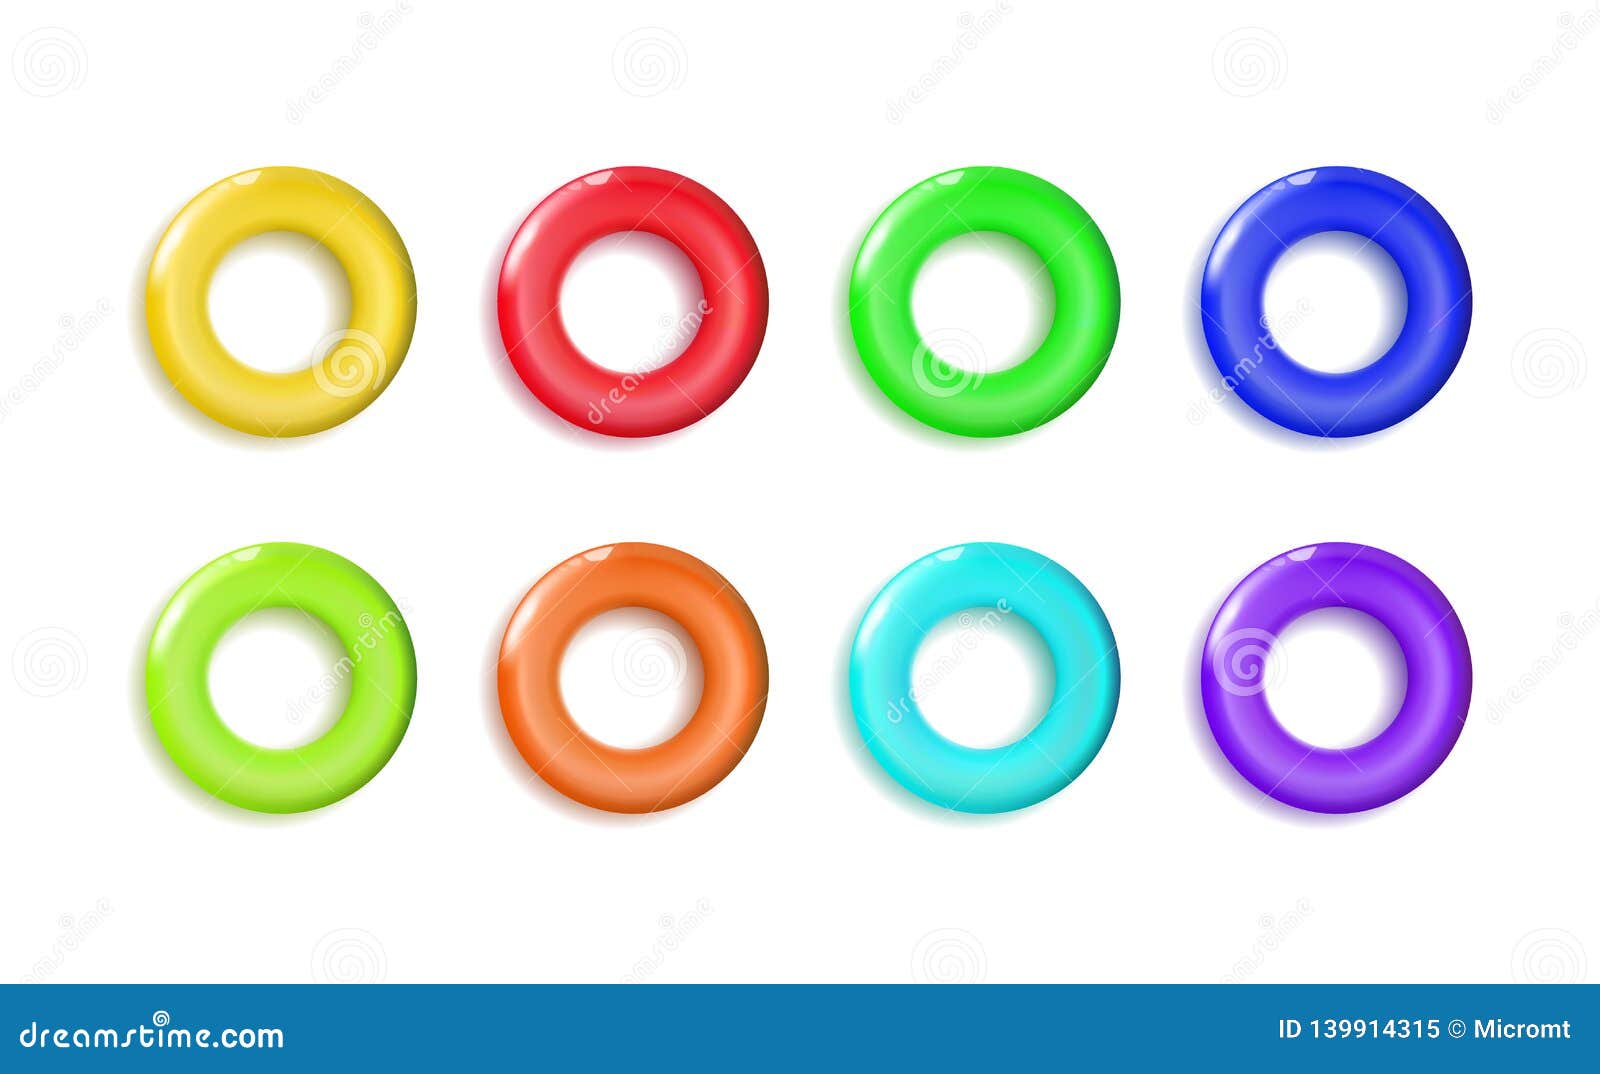 Download Set Glossy Yellow Plastic Toys Ring Toy Bagel Or Donut Colorful For Pyramid Classic Circle With A Fun Design Baby Element Stock Vector Illustration Of Colourful Built 139914315 Yellowimages Mockups